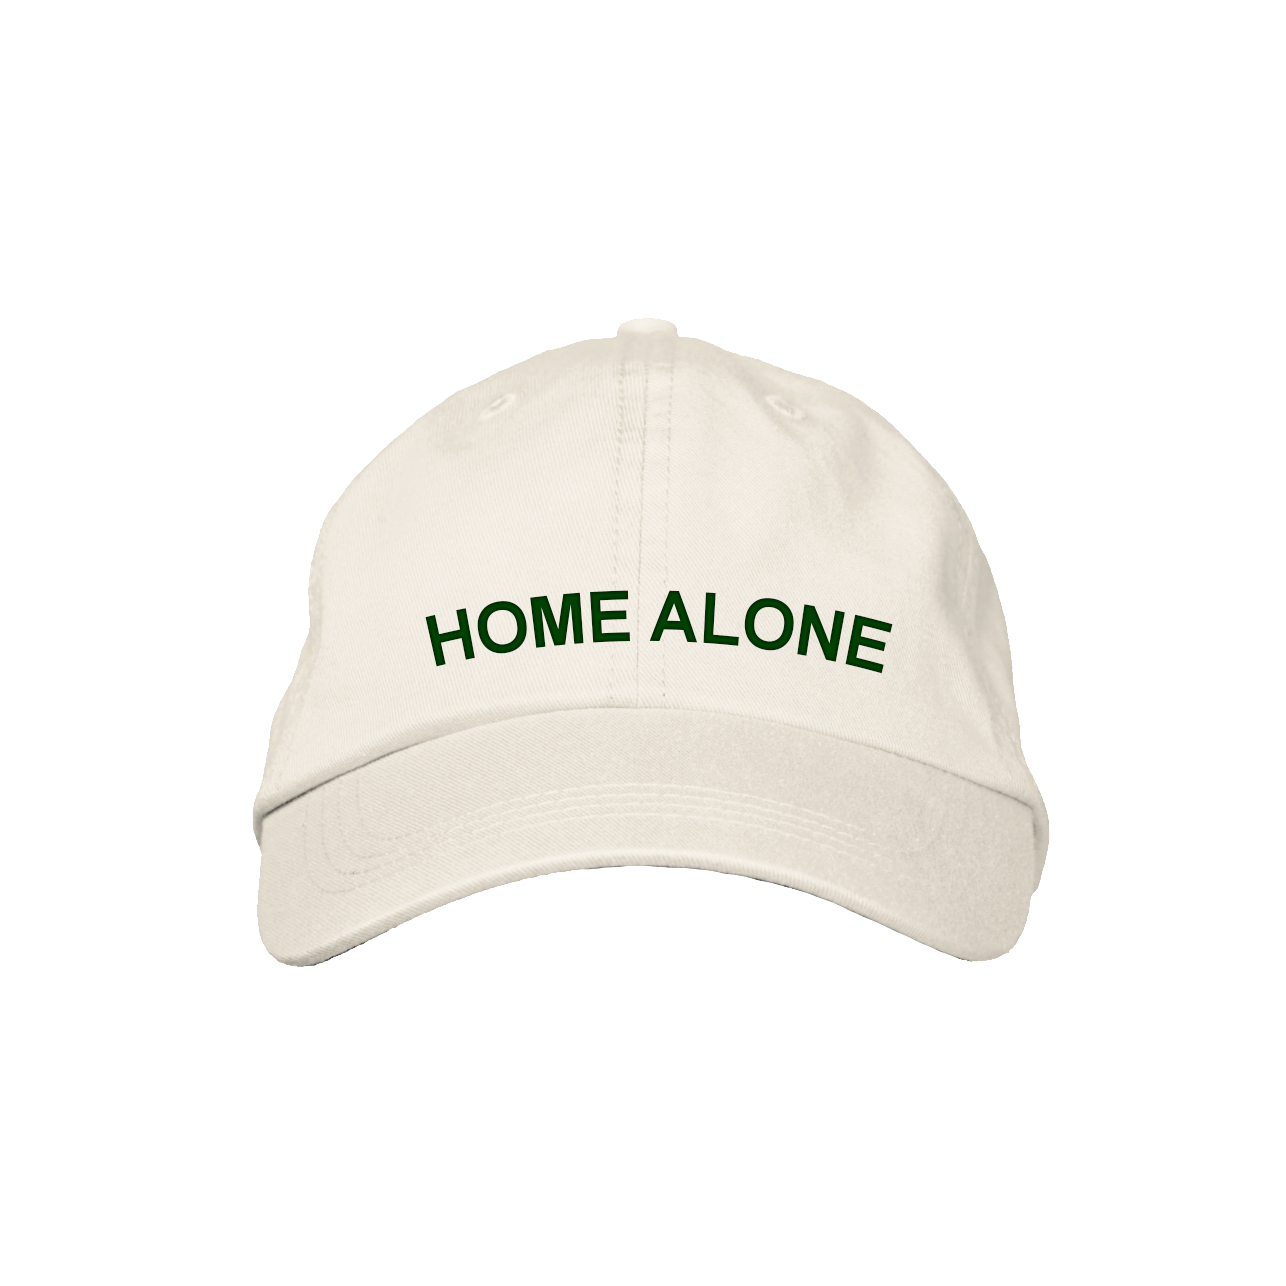 HOME ALONE HAT